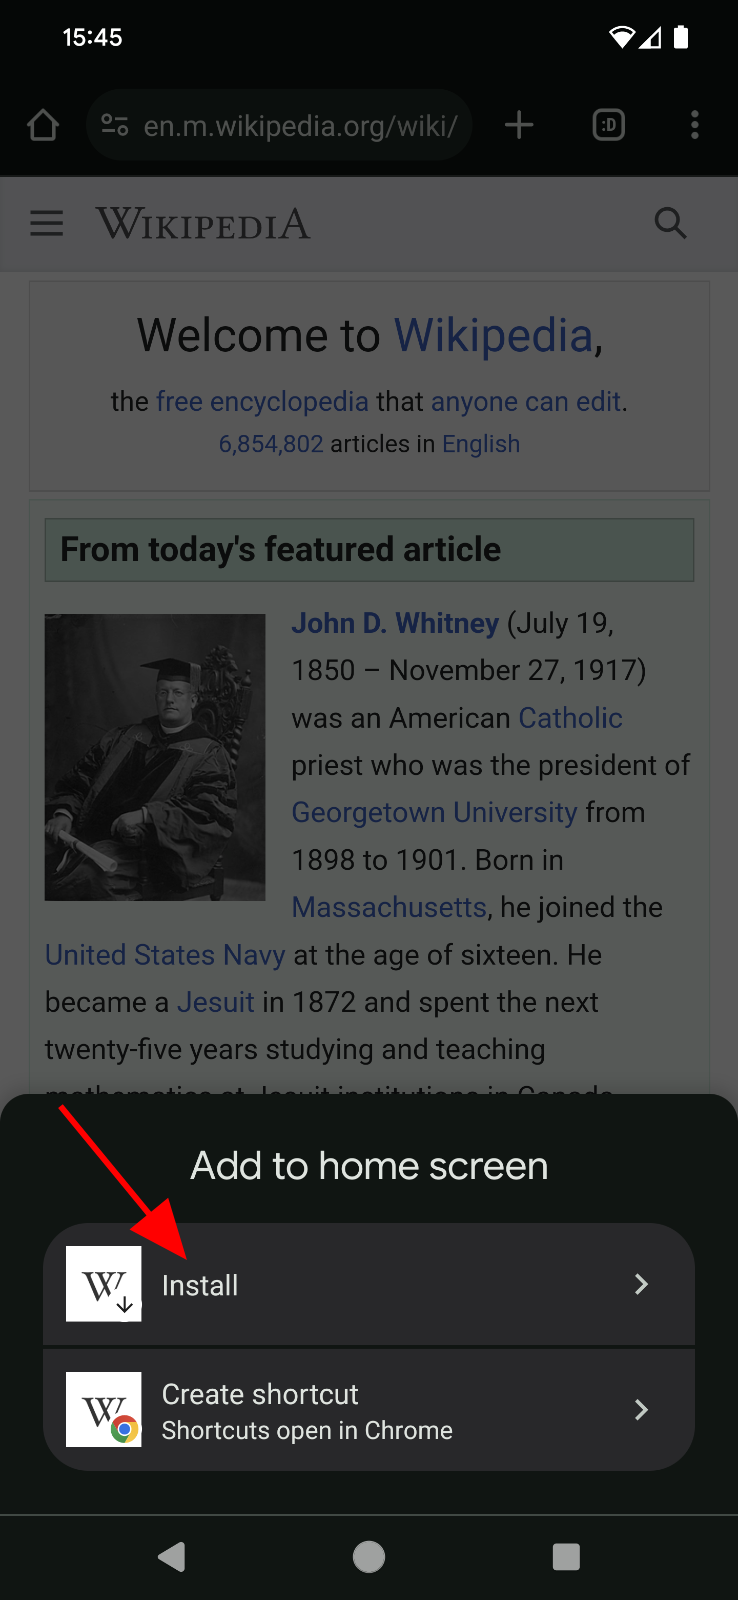 Add to home screen prompt on the Wikipedia website.